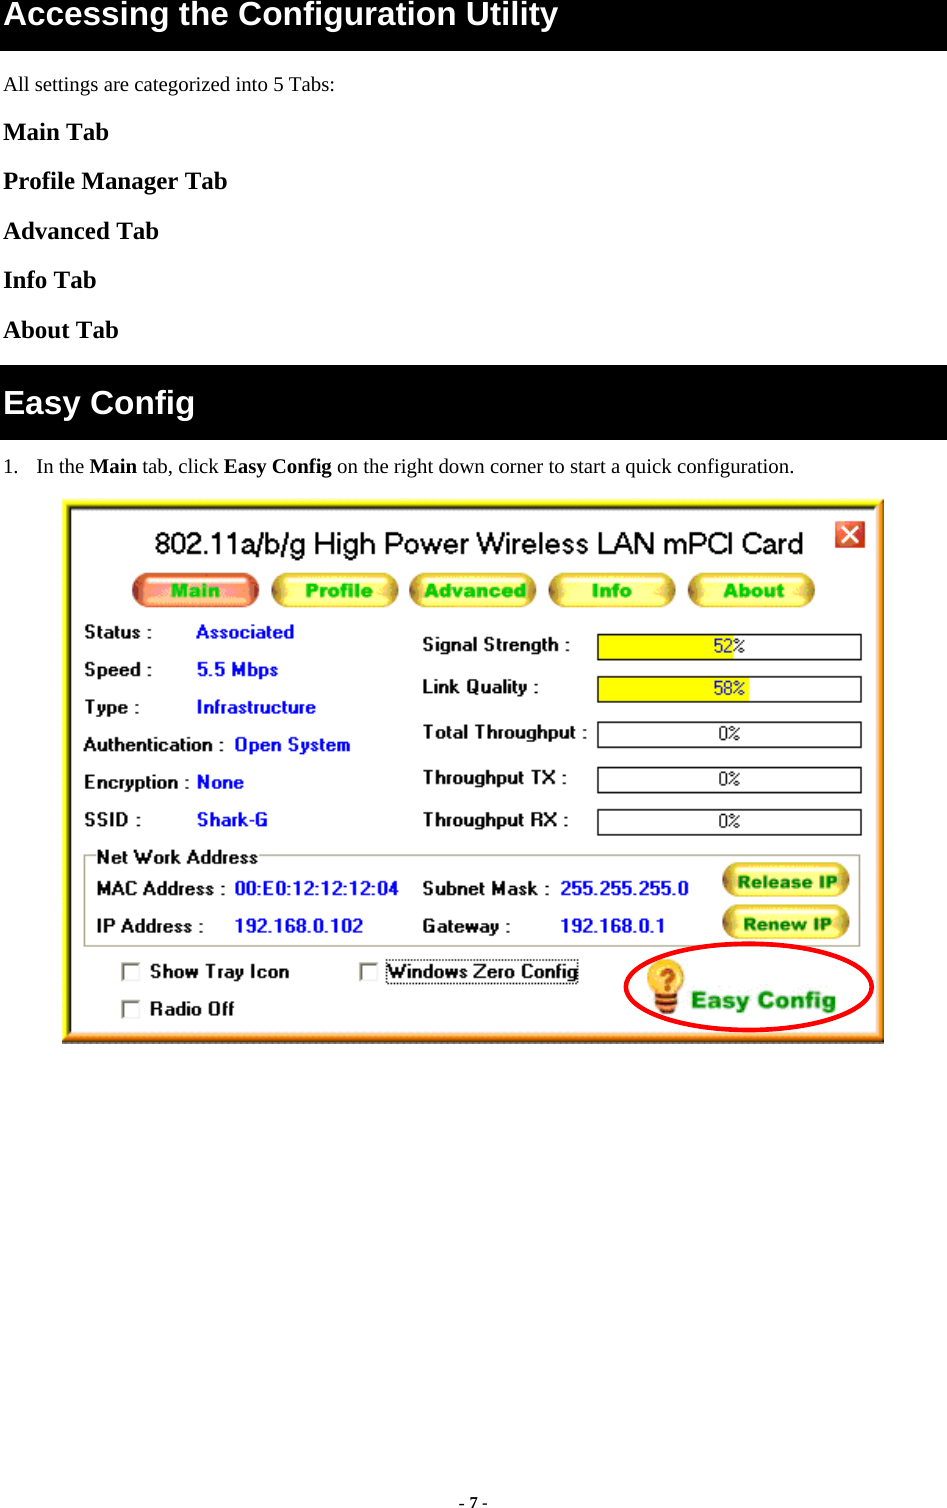  - 7 - Accessing the Configuration Utility All settings are categorized into 5 Tabs: Main Tab Profile Manager Tab Advanced Tab Info Tab About Tab Easy Config 1. In the Main tab, click Easy Config on the right down corner to start a quick configuration.   